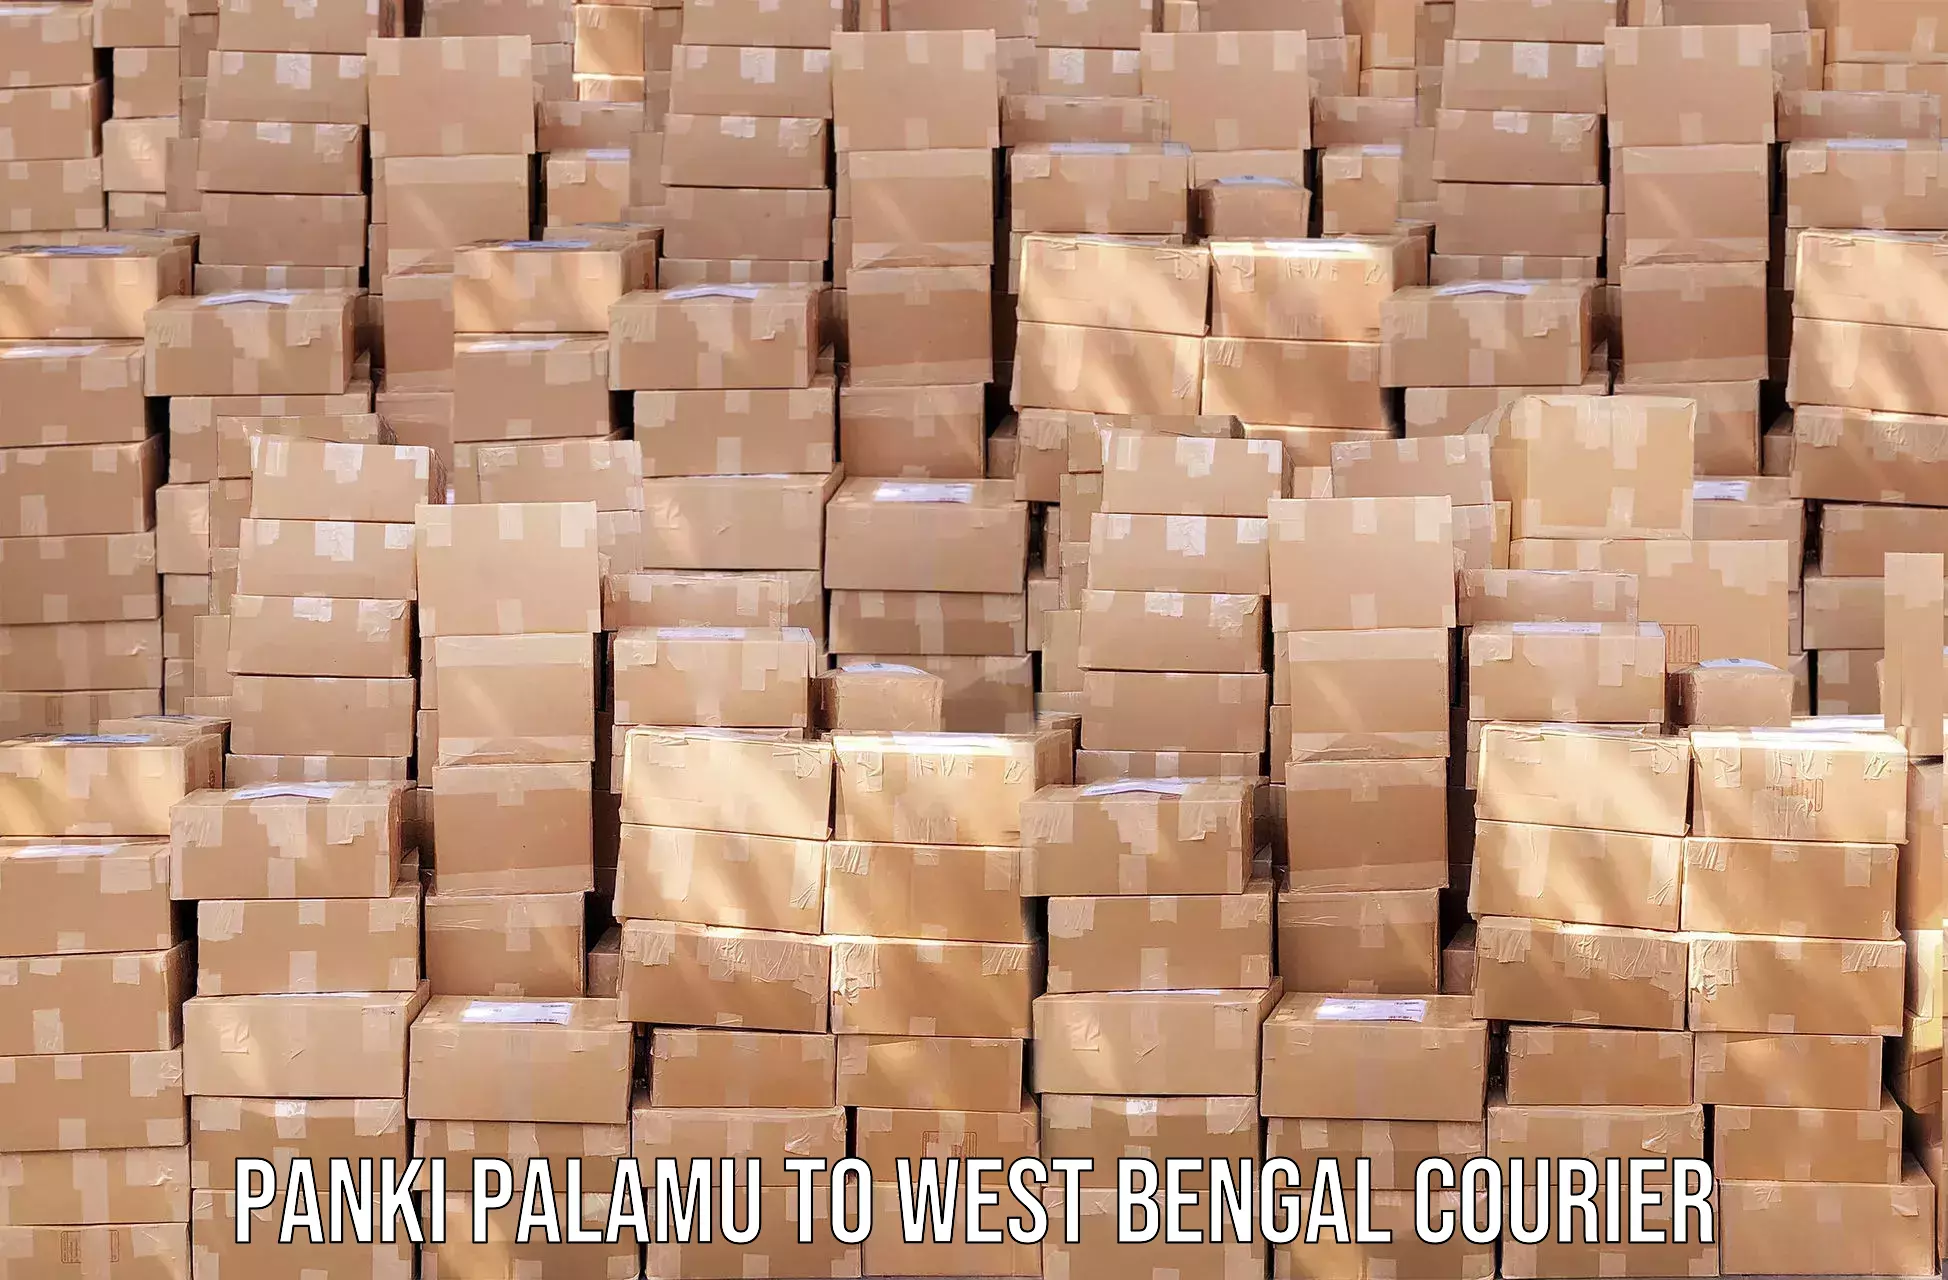 Multi-national courier services Panki Palamu to West Bengal